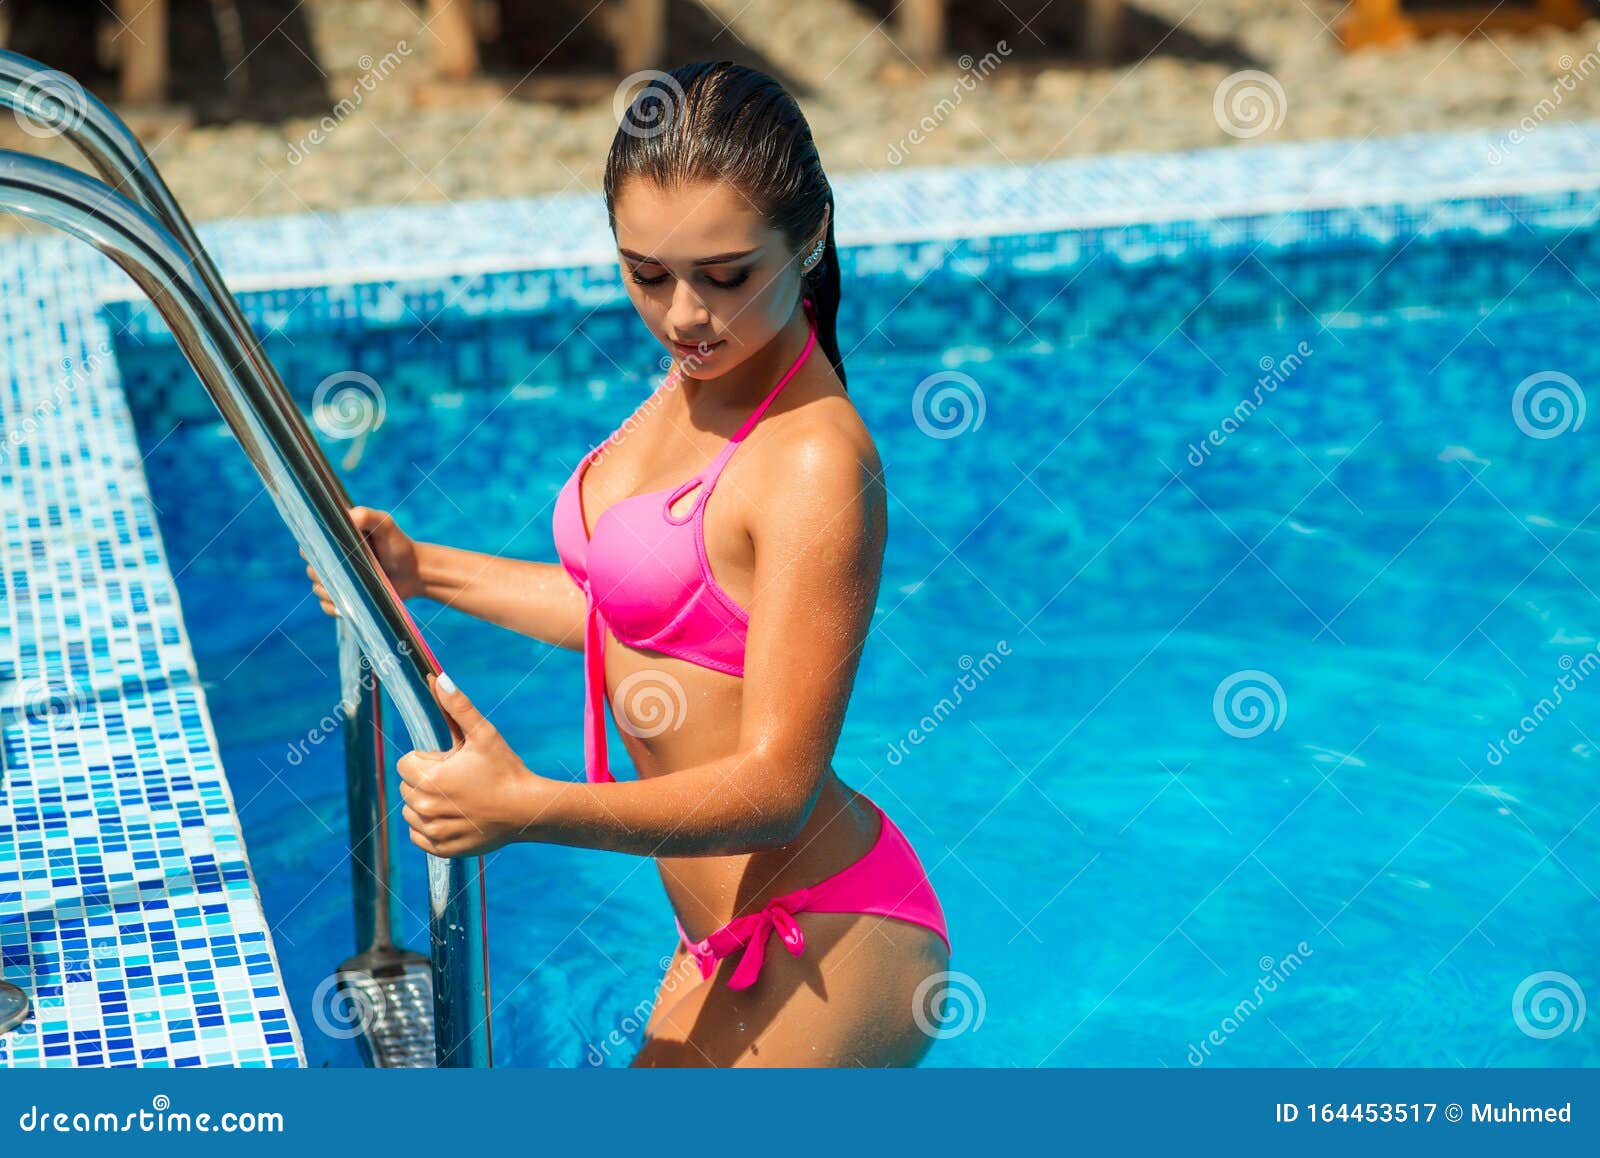 Happy woman swimming in pool in red swimsuit with loose long hair